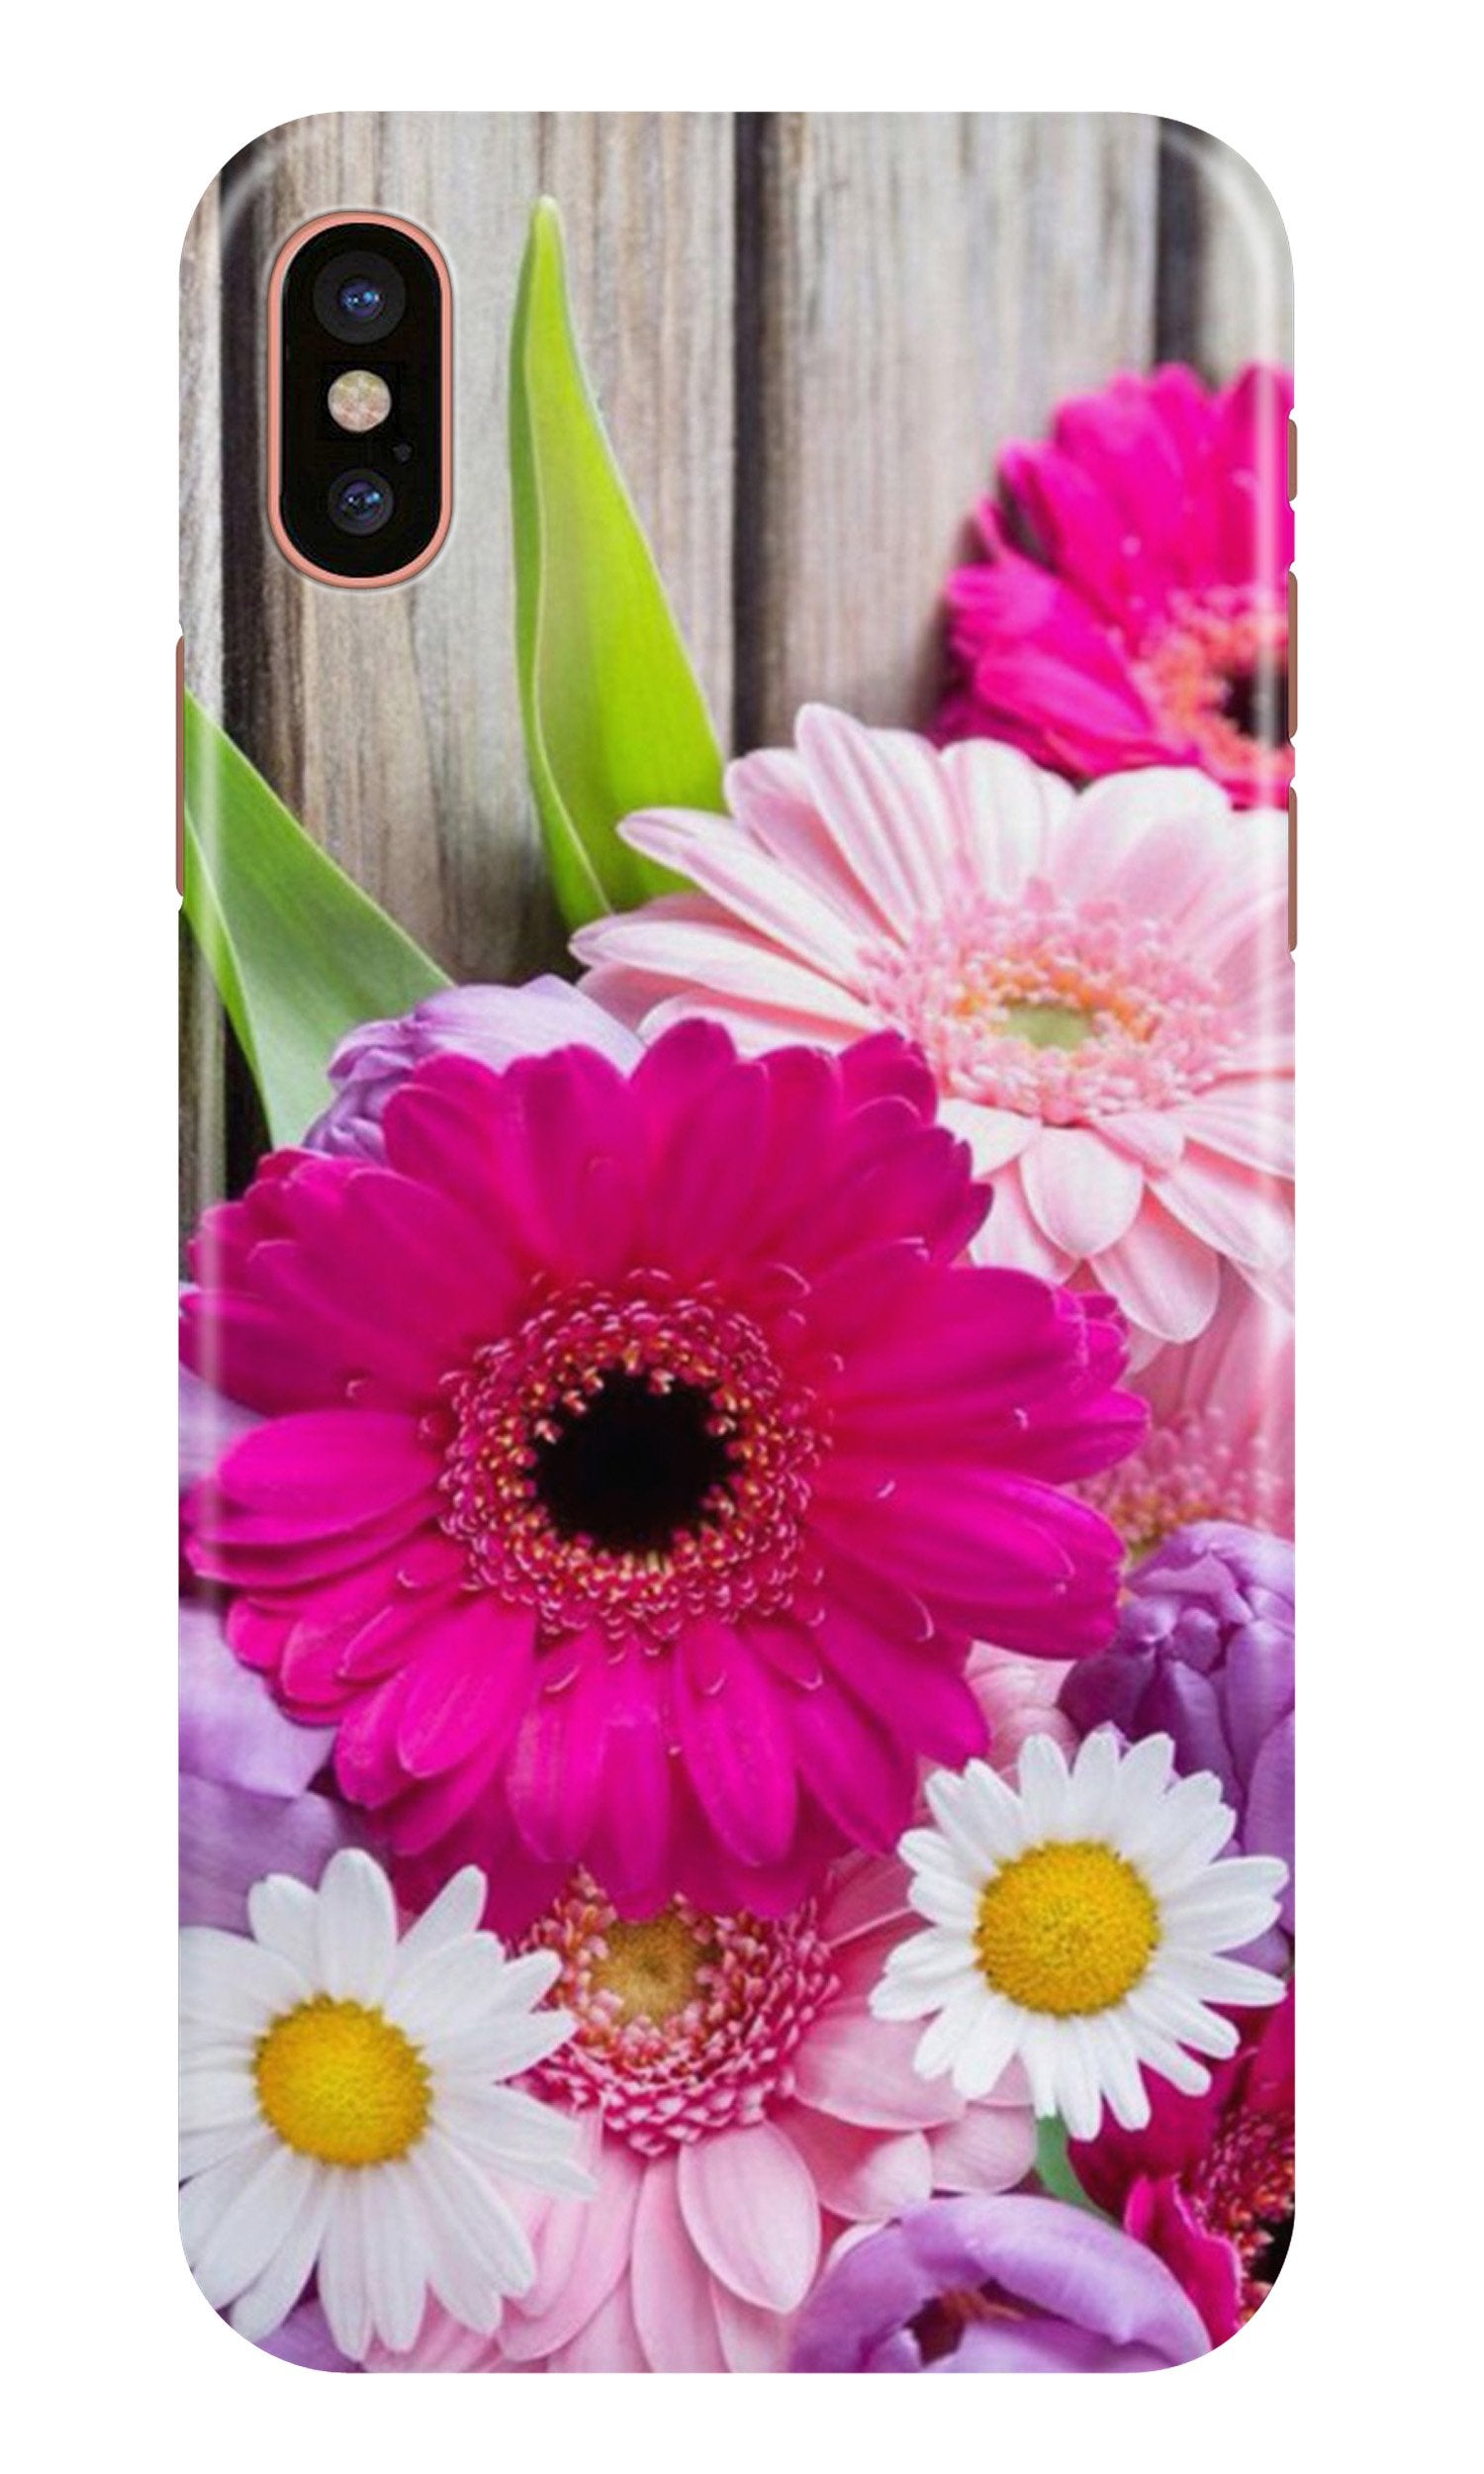 Coloful Daisy2 Case for iPhone X